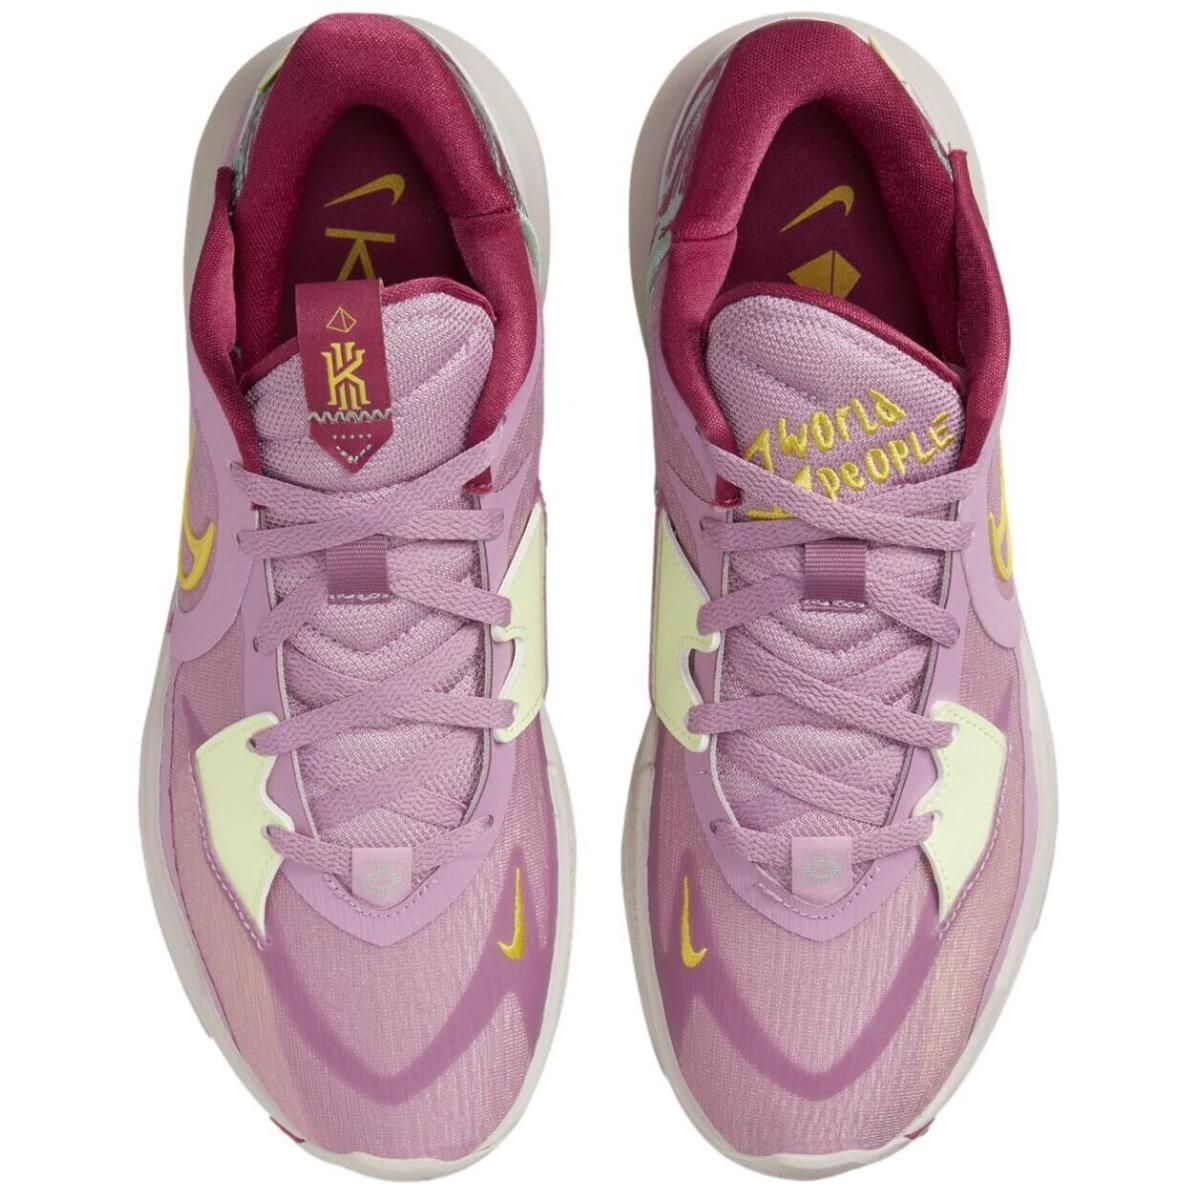 Nike shoes Kyrie - Pink 3